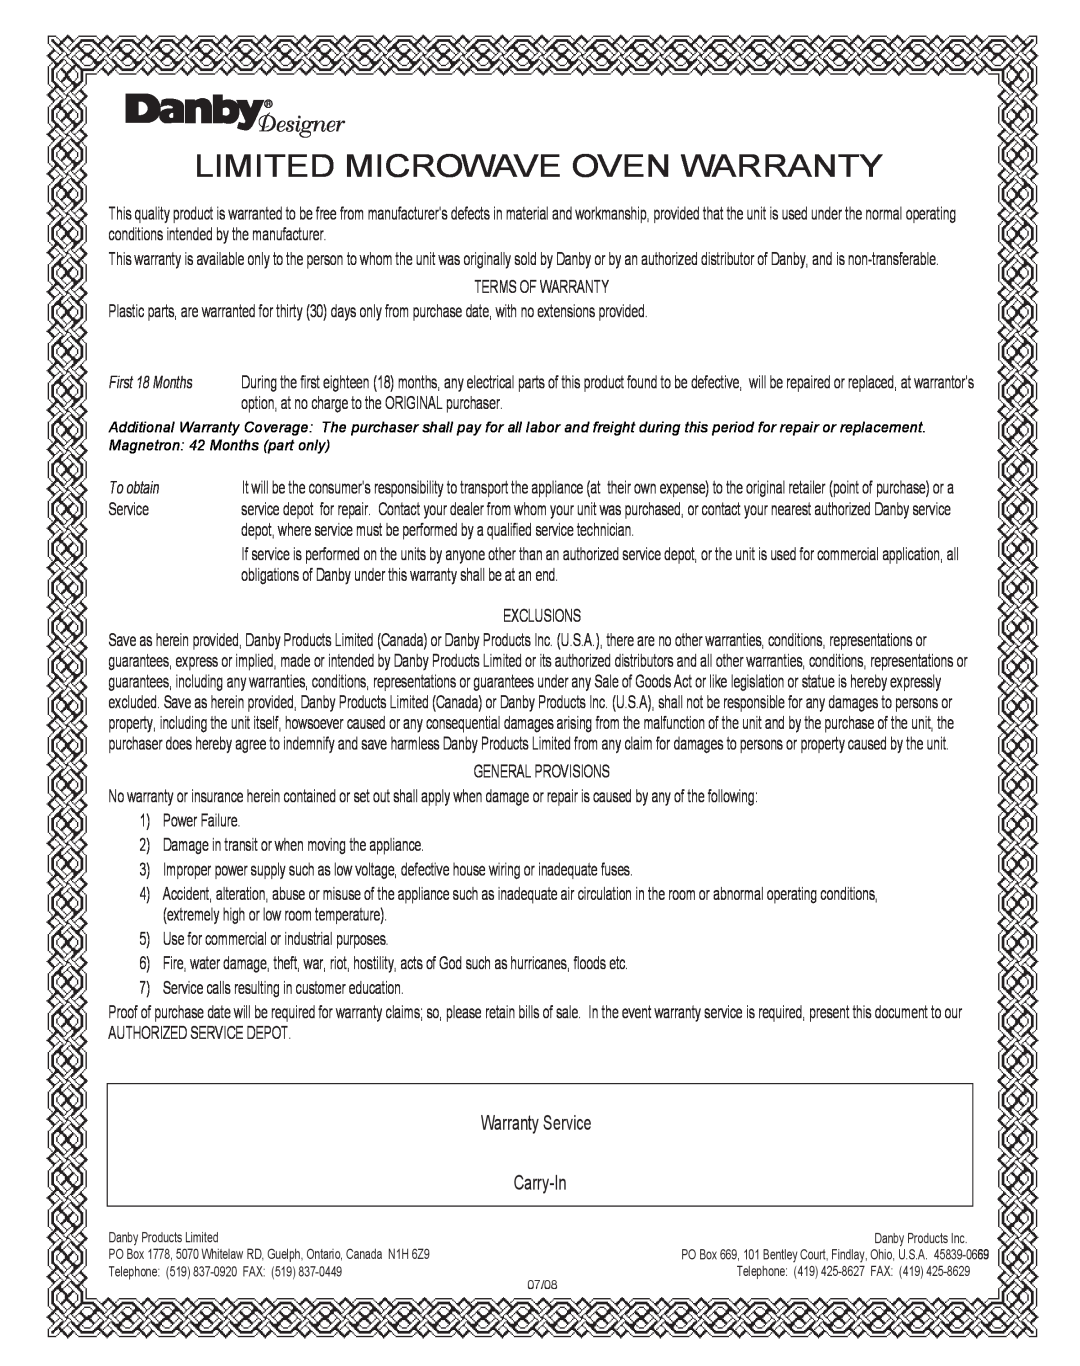 Danby DMW1048SS owner manual Limited Microwave Oven Warranty, Warranty Service, Carry-In, First 18 Months, To obtain 